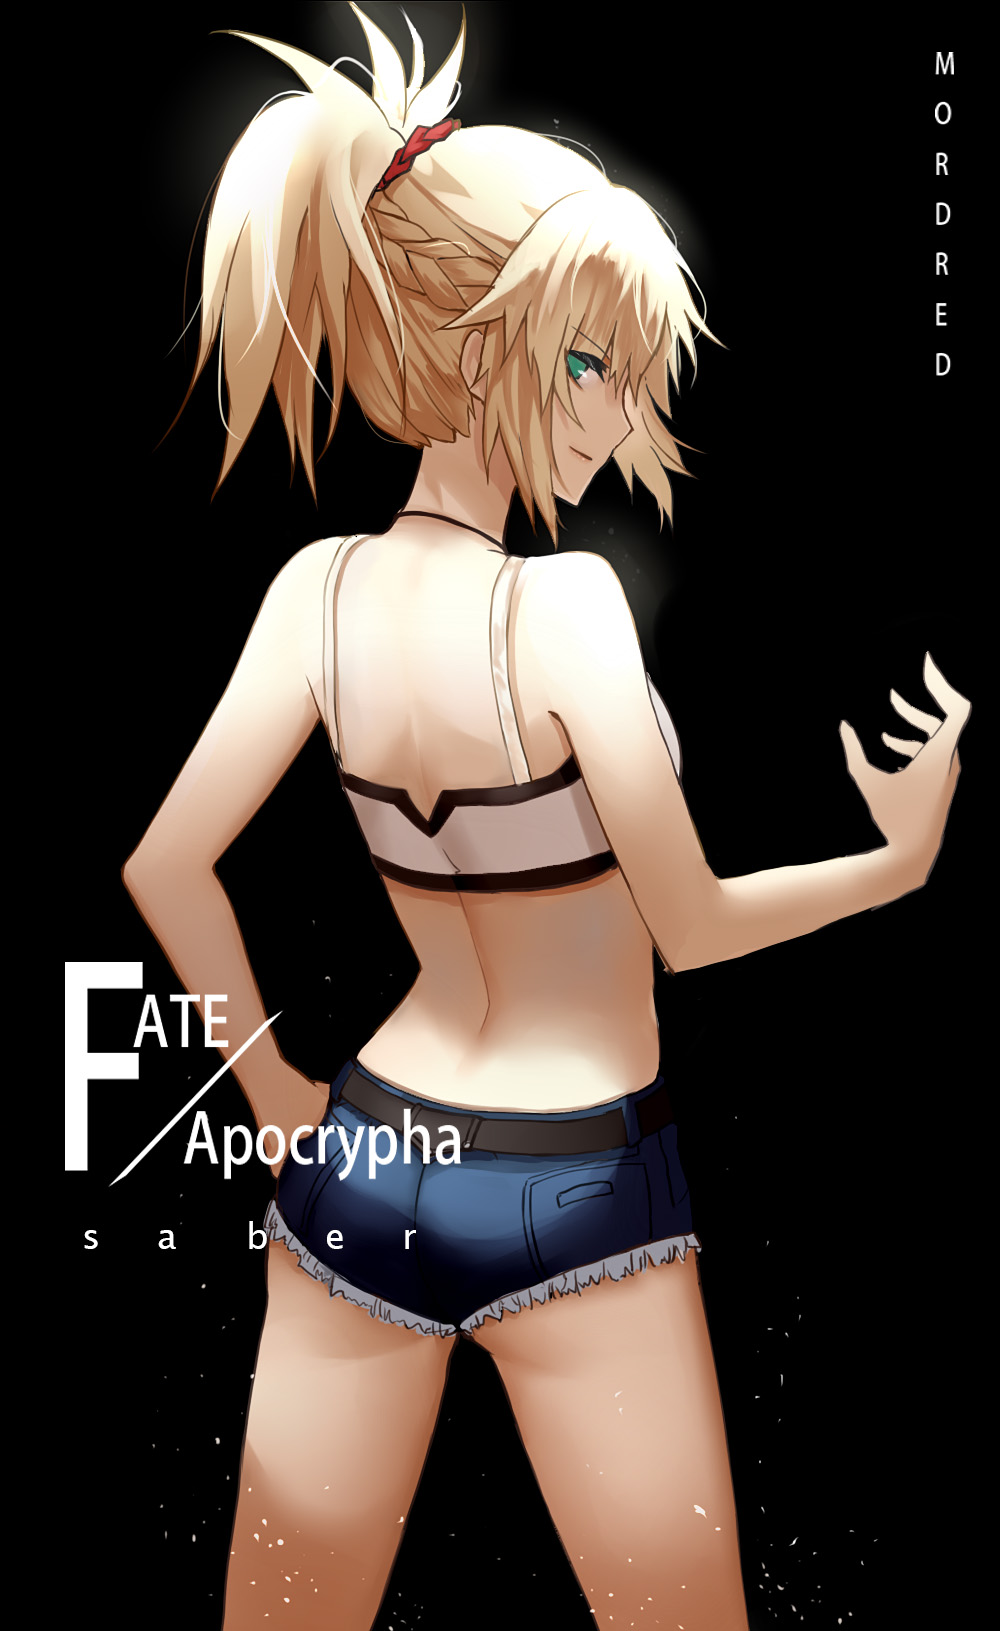 Anime 1000x1631 Mordred (Fate/Apocrypha) anime anime girls portrait display digital art artwork blonde ponytail smiling Fate/Grand Order Fate/Apocrypha  short pants green eyes Fate series